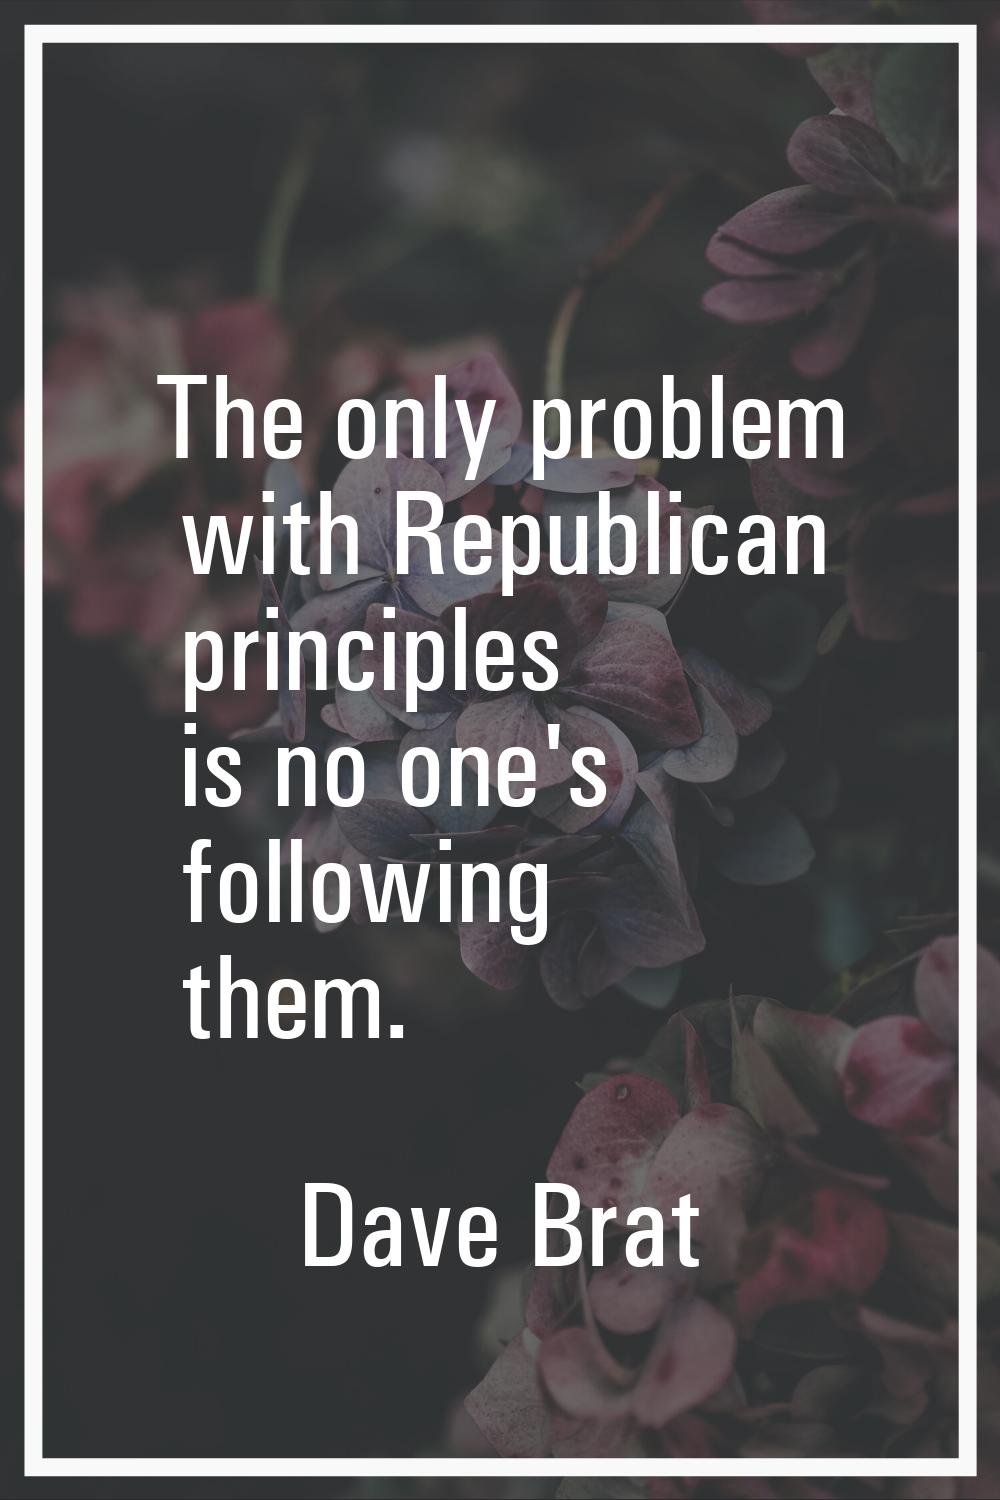 The only problem with Republican principles is no one's following them.